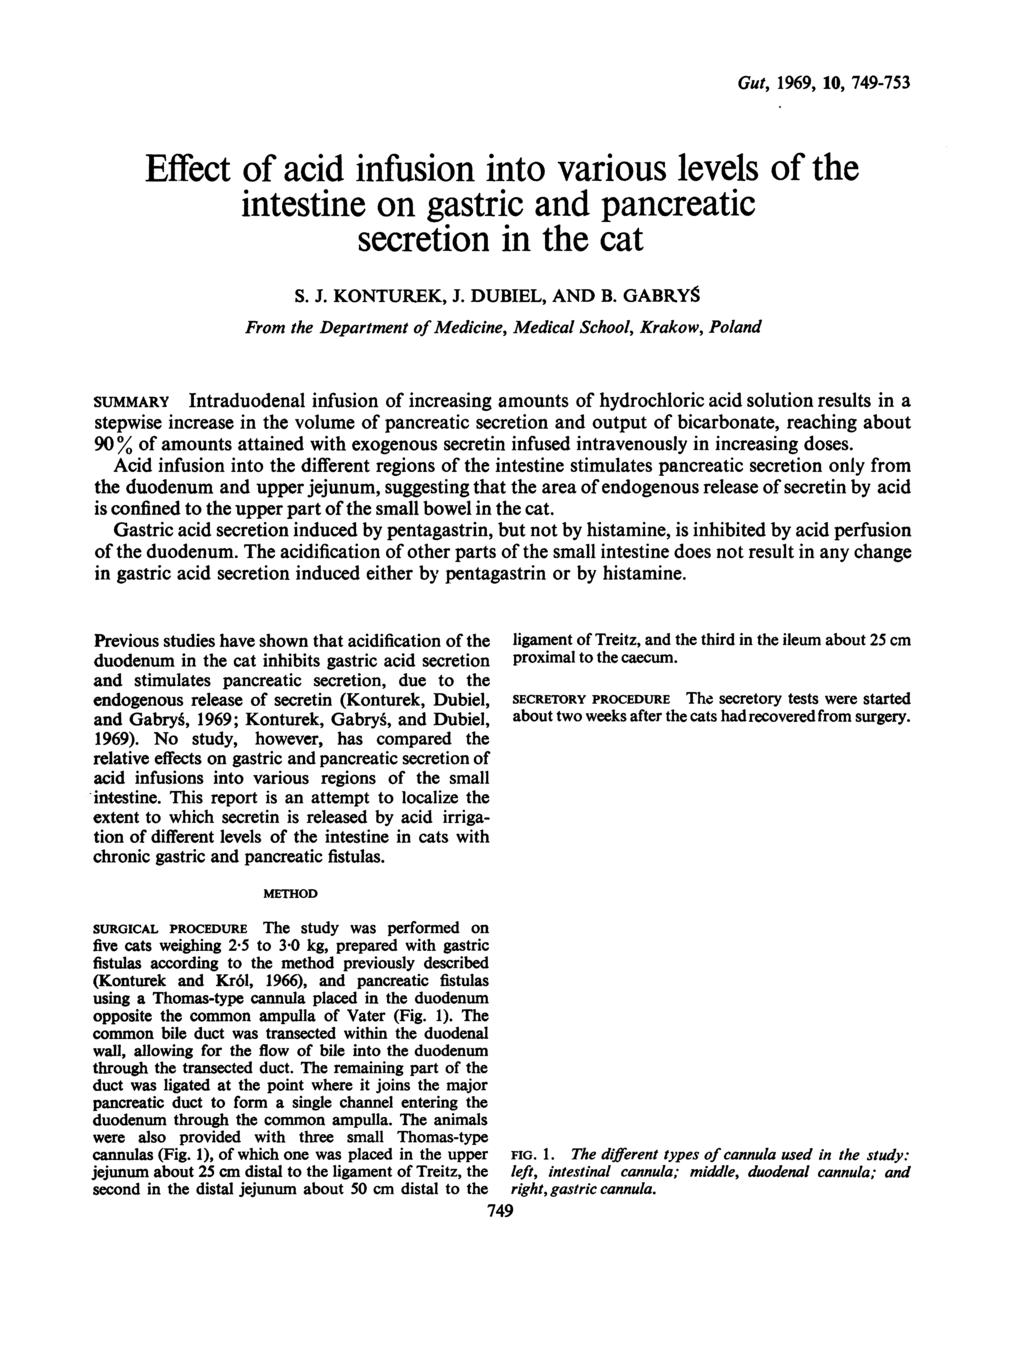 Gut, 1969, 10, 749-753 Effect of acid infusion into various levels of the intestine on gastric and pancreatic secretion in the cat S. J. KONTUREK, J. DUBIEL, AND B.